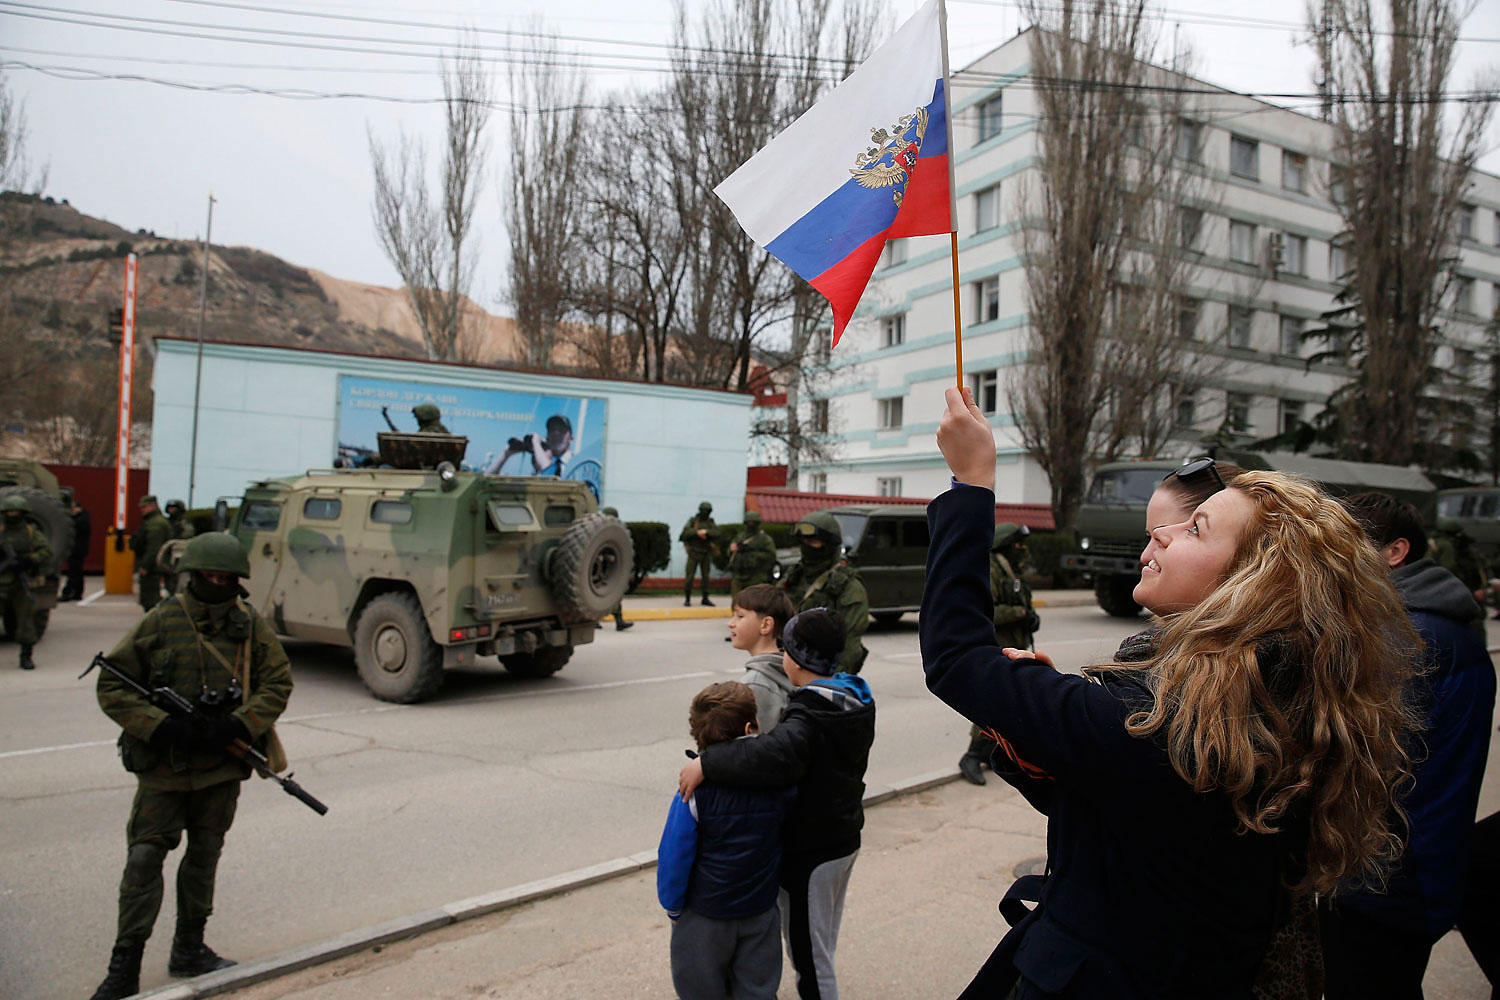 A woman waves a Russian flag as armed servicemen wait near Russian army vehicles outside a Ukrainian border guard post in the Crimean town of Balaclava March 1, 2014. (Baz Ratner&mdash;REUTERS)